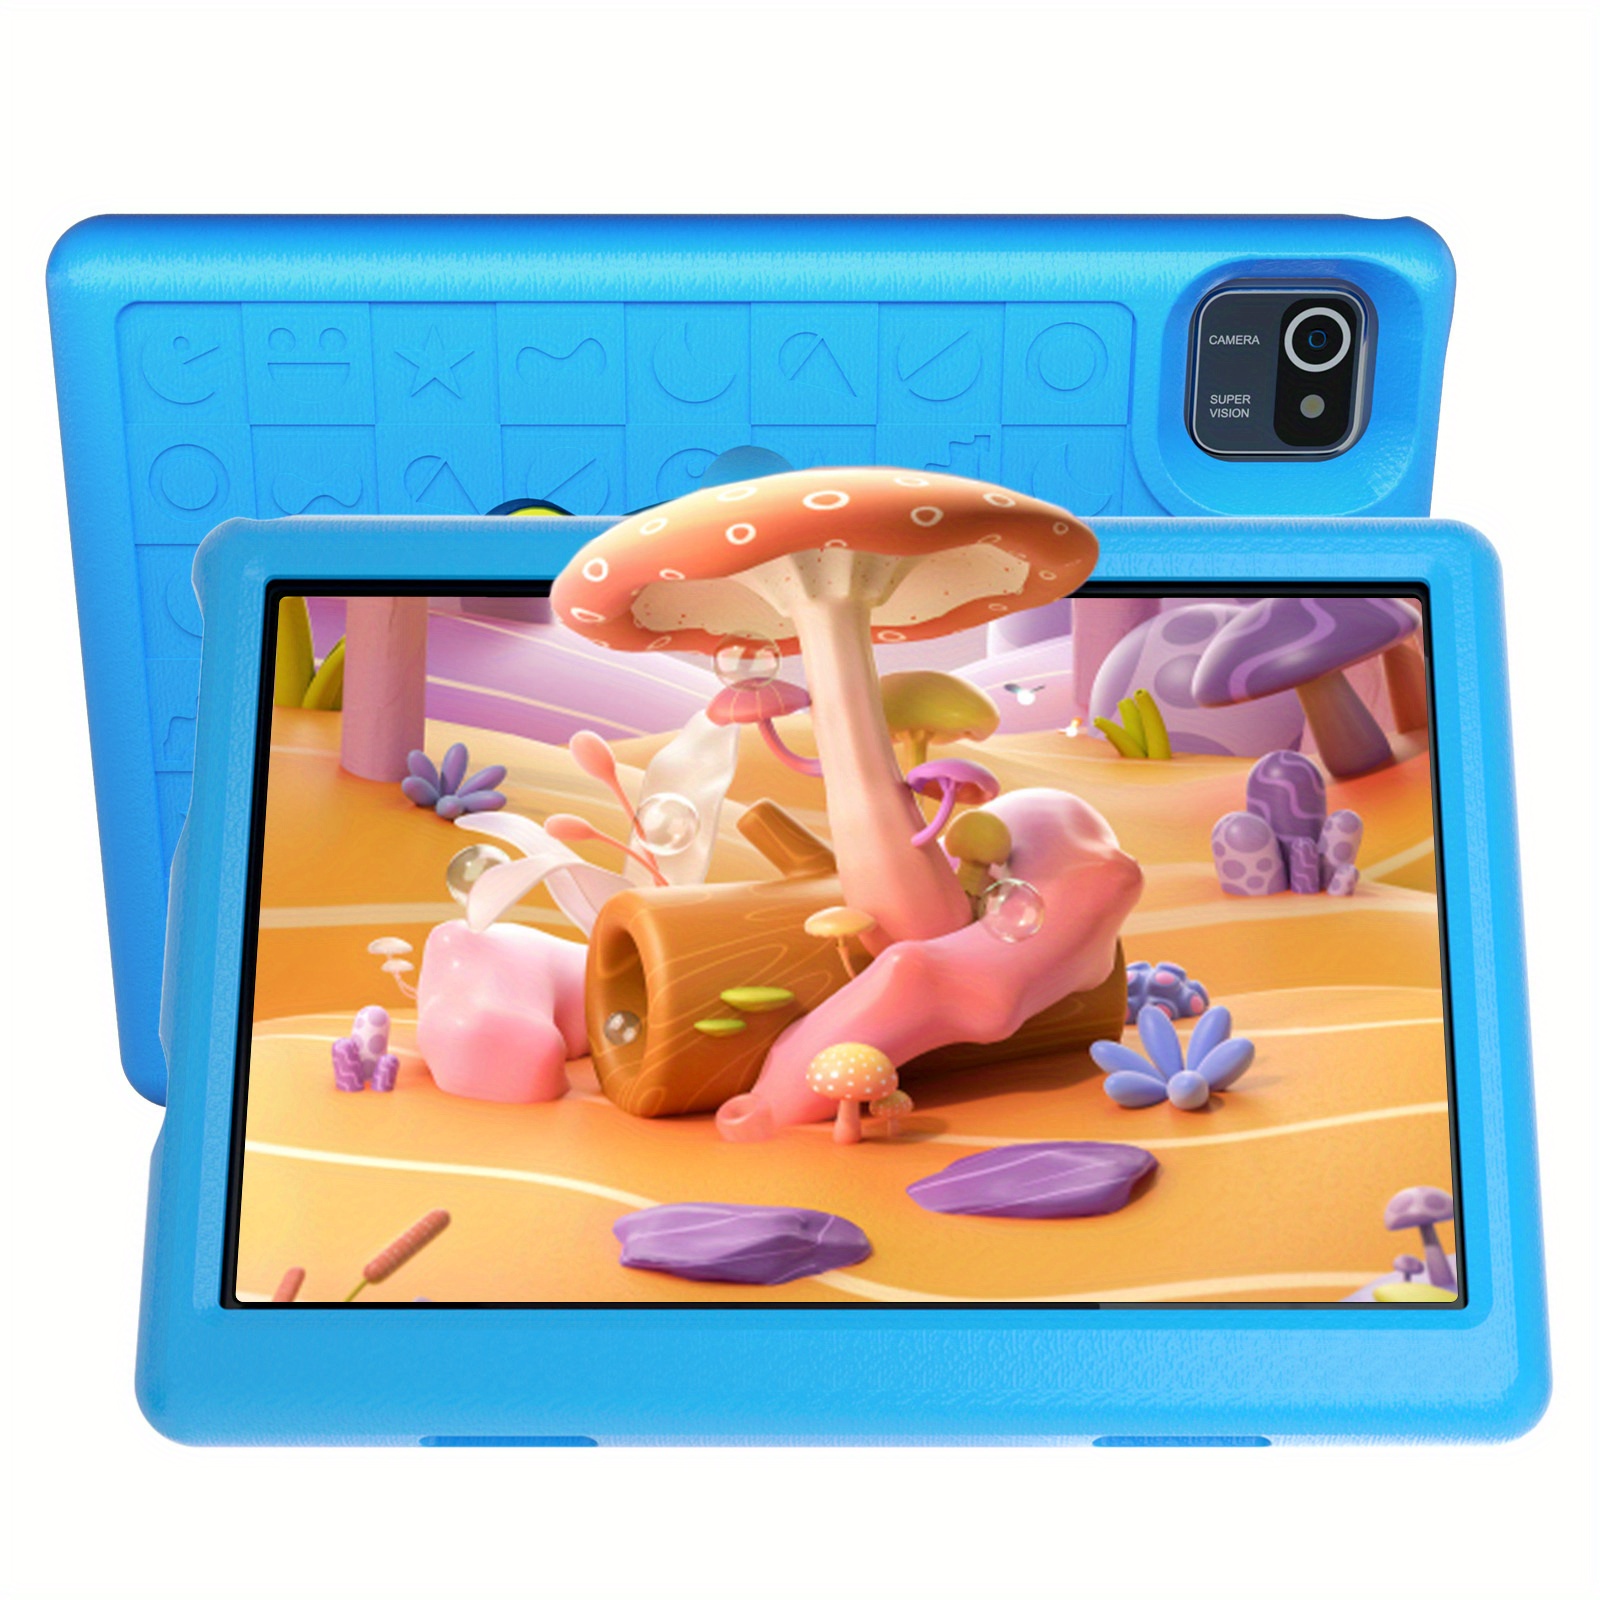 

Aeezo 10 Inch Android 13 Kids Tablet, 6gb+64gb, Dual Camera, 5000 Mah, Parent Control, Fall-proof Case, Wifi, Blue/pink